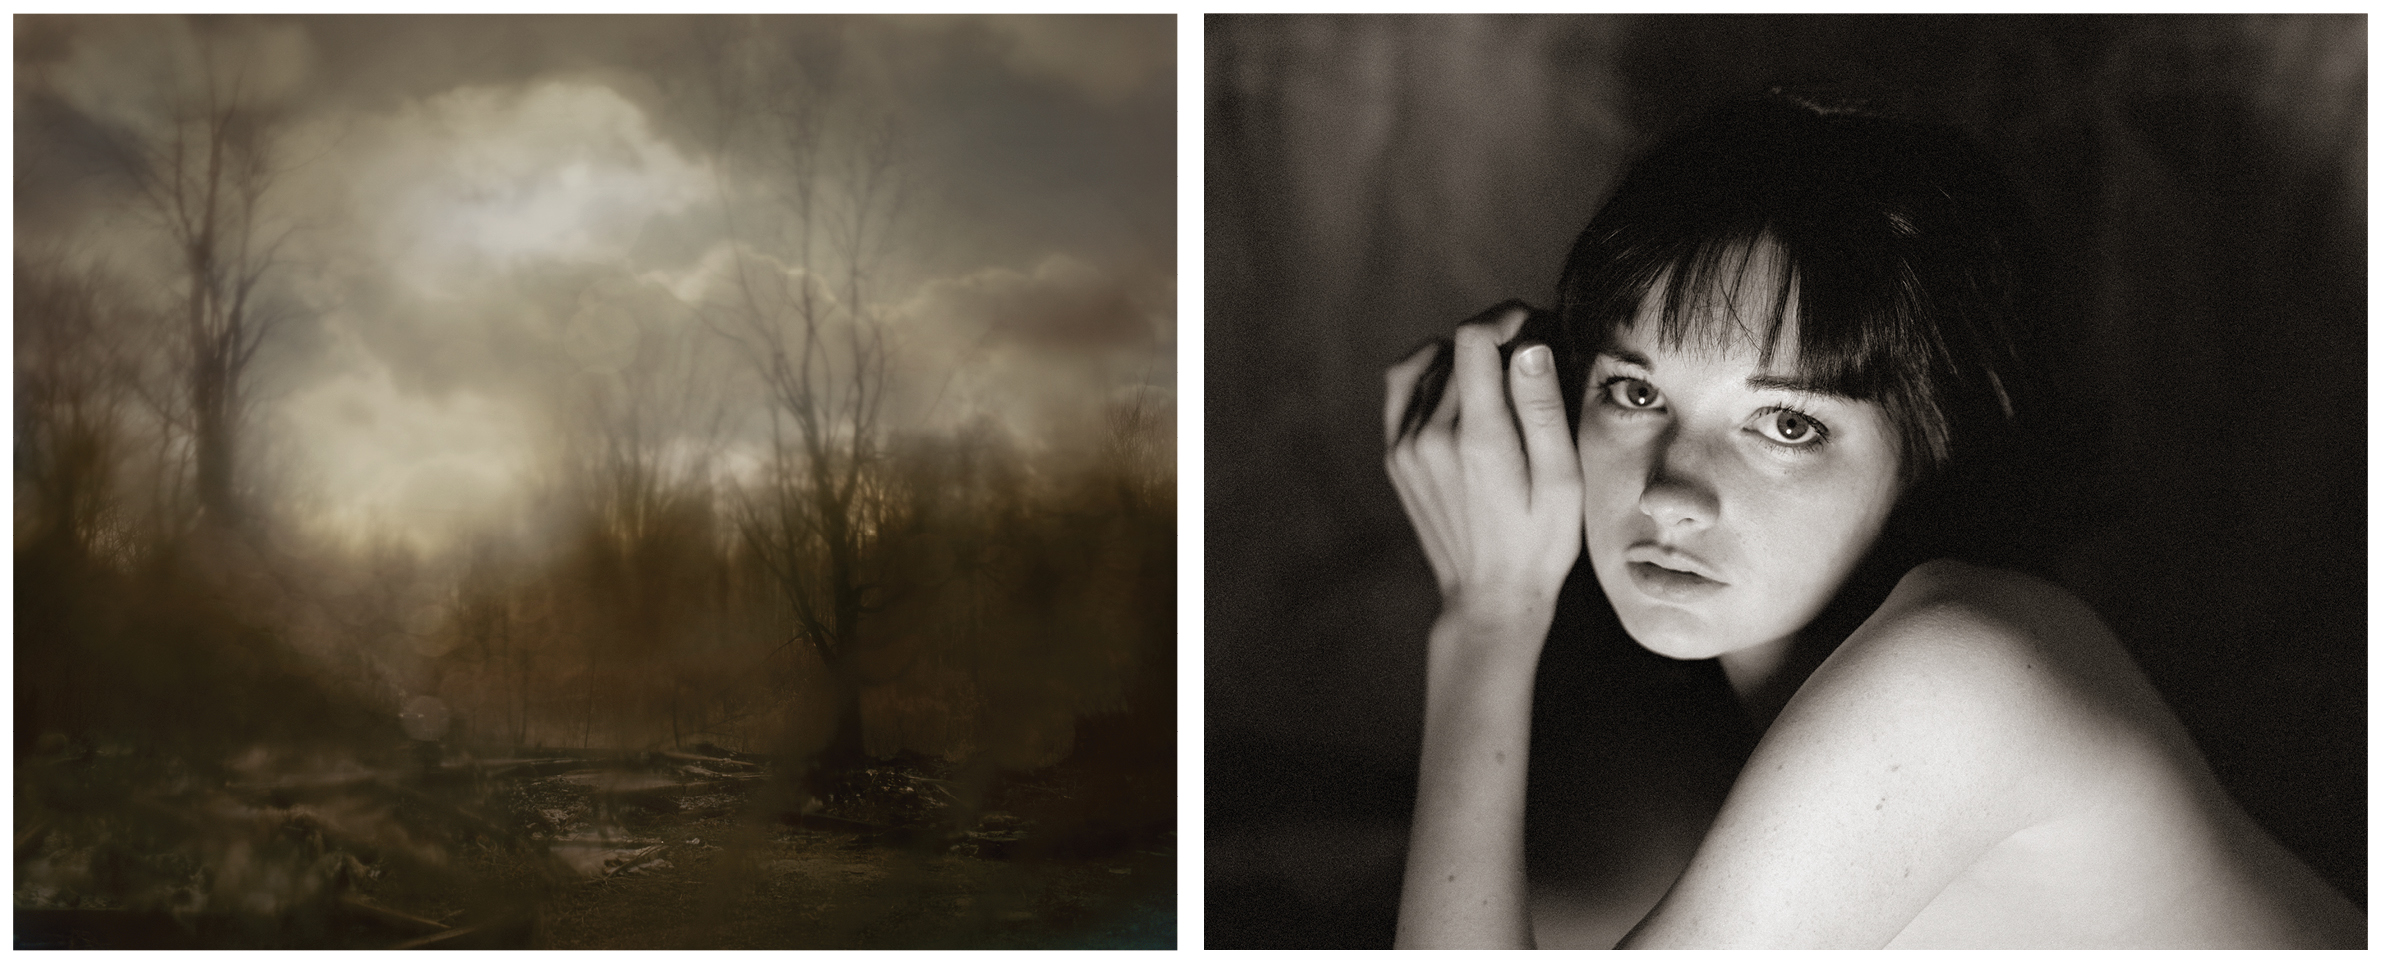 Todd Hido: Excerpts From Silver Meadows — Aufuldish & Warinner